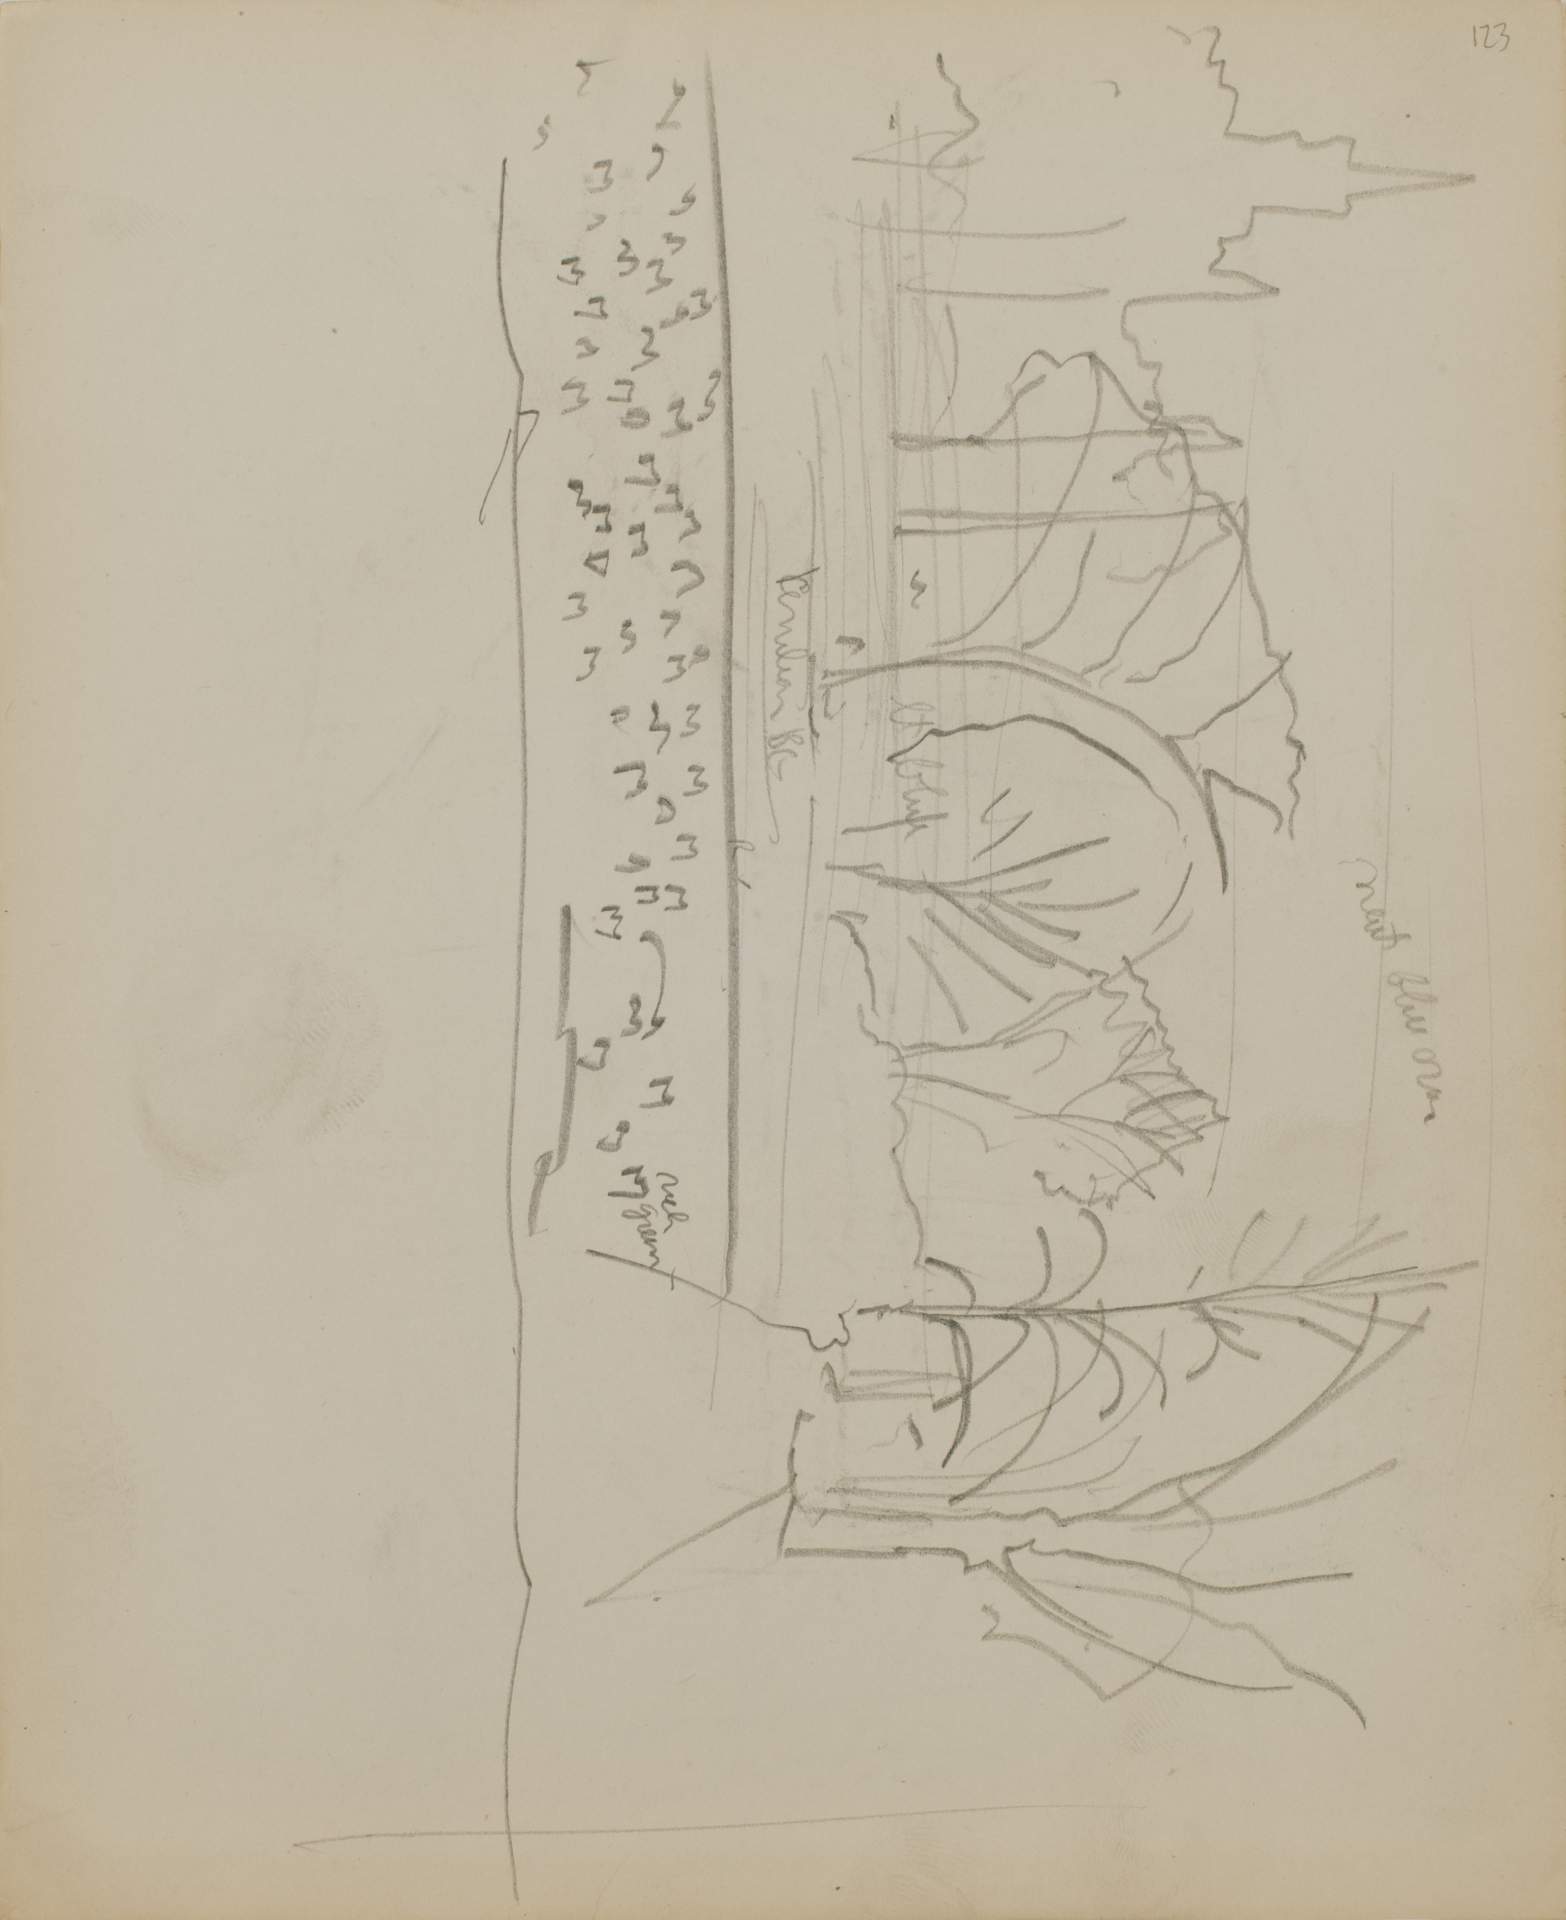 Untitled (landscape with trees and path)